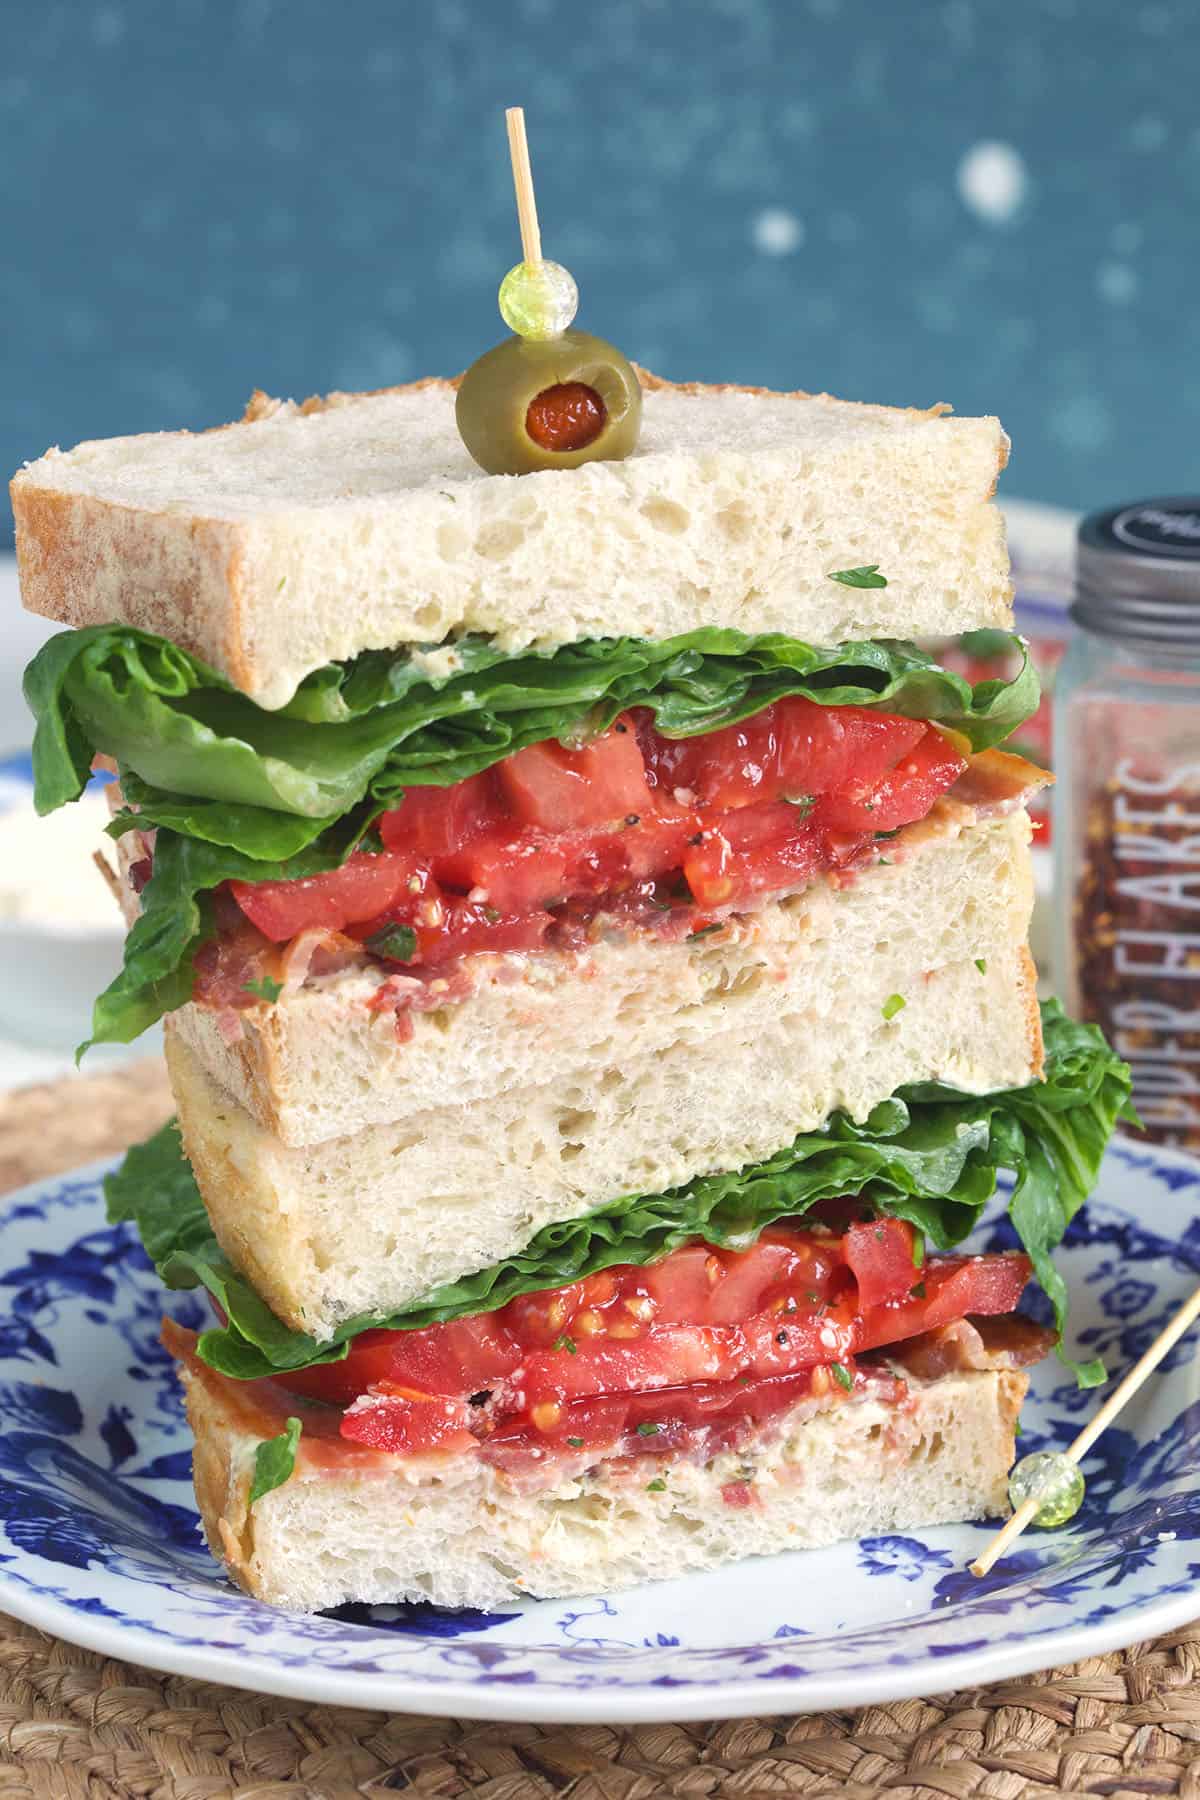 Two halves of BLT sandwich stacked on a blue and white plate with a toothpick and olive on top.